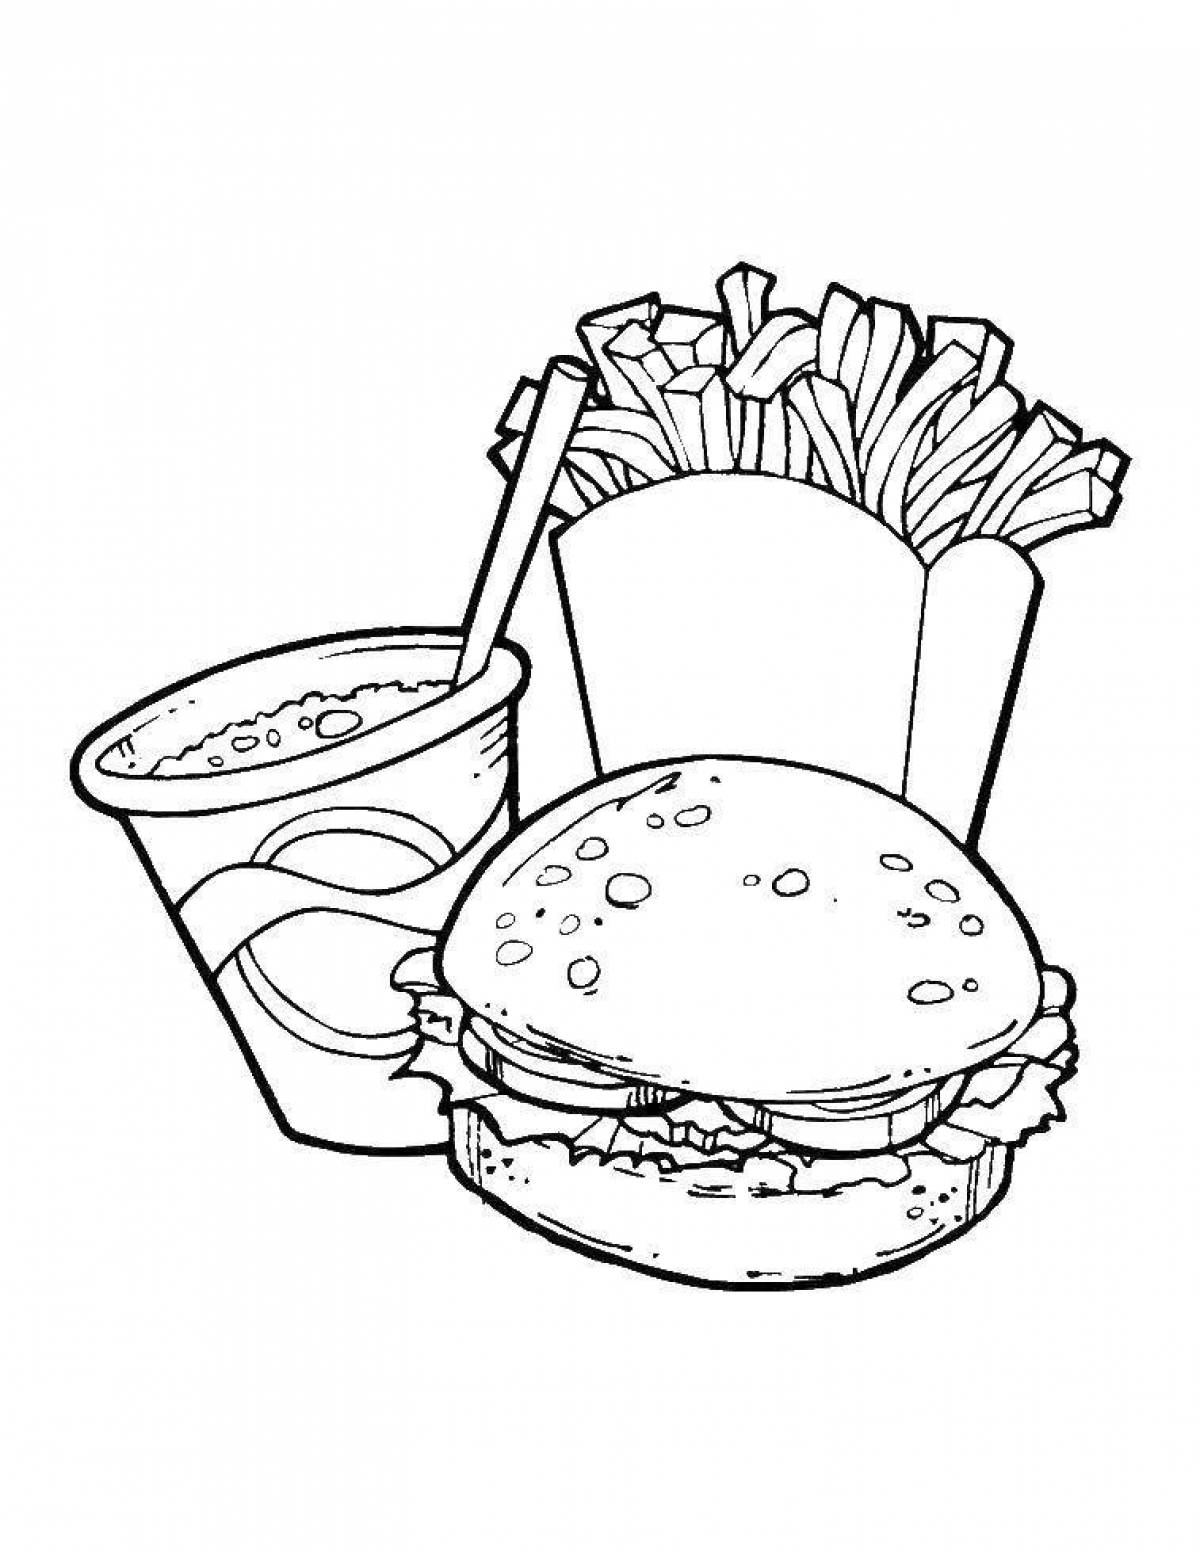 Attractive french fries coloring page